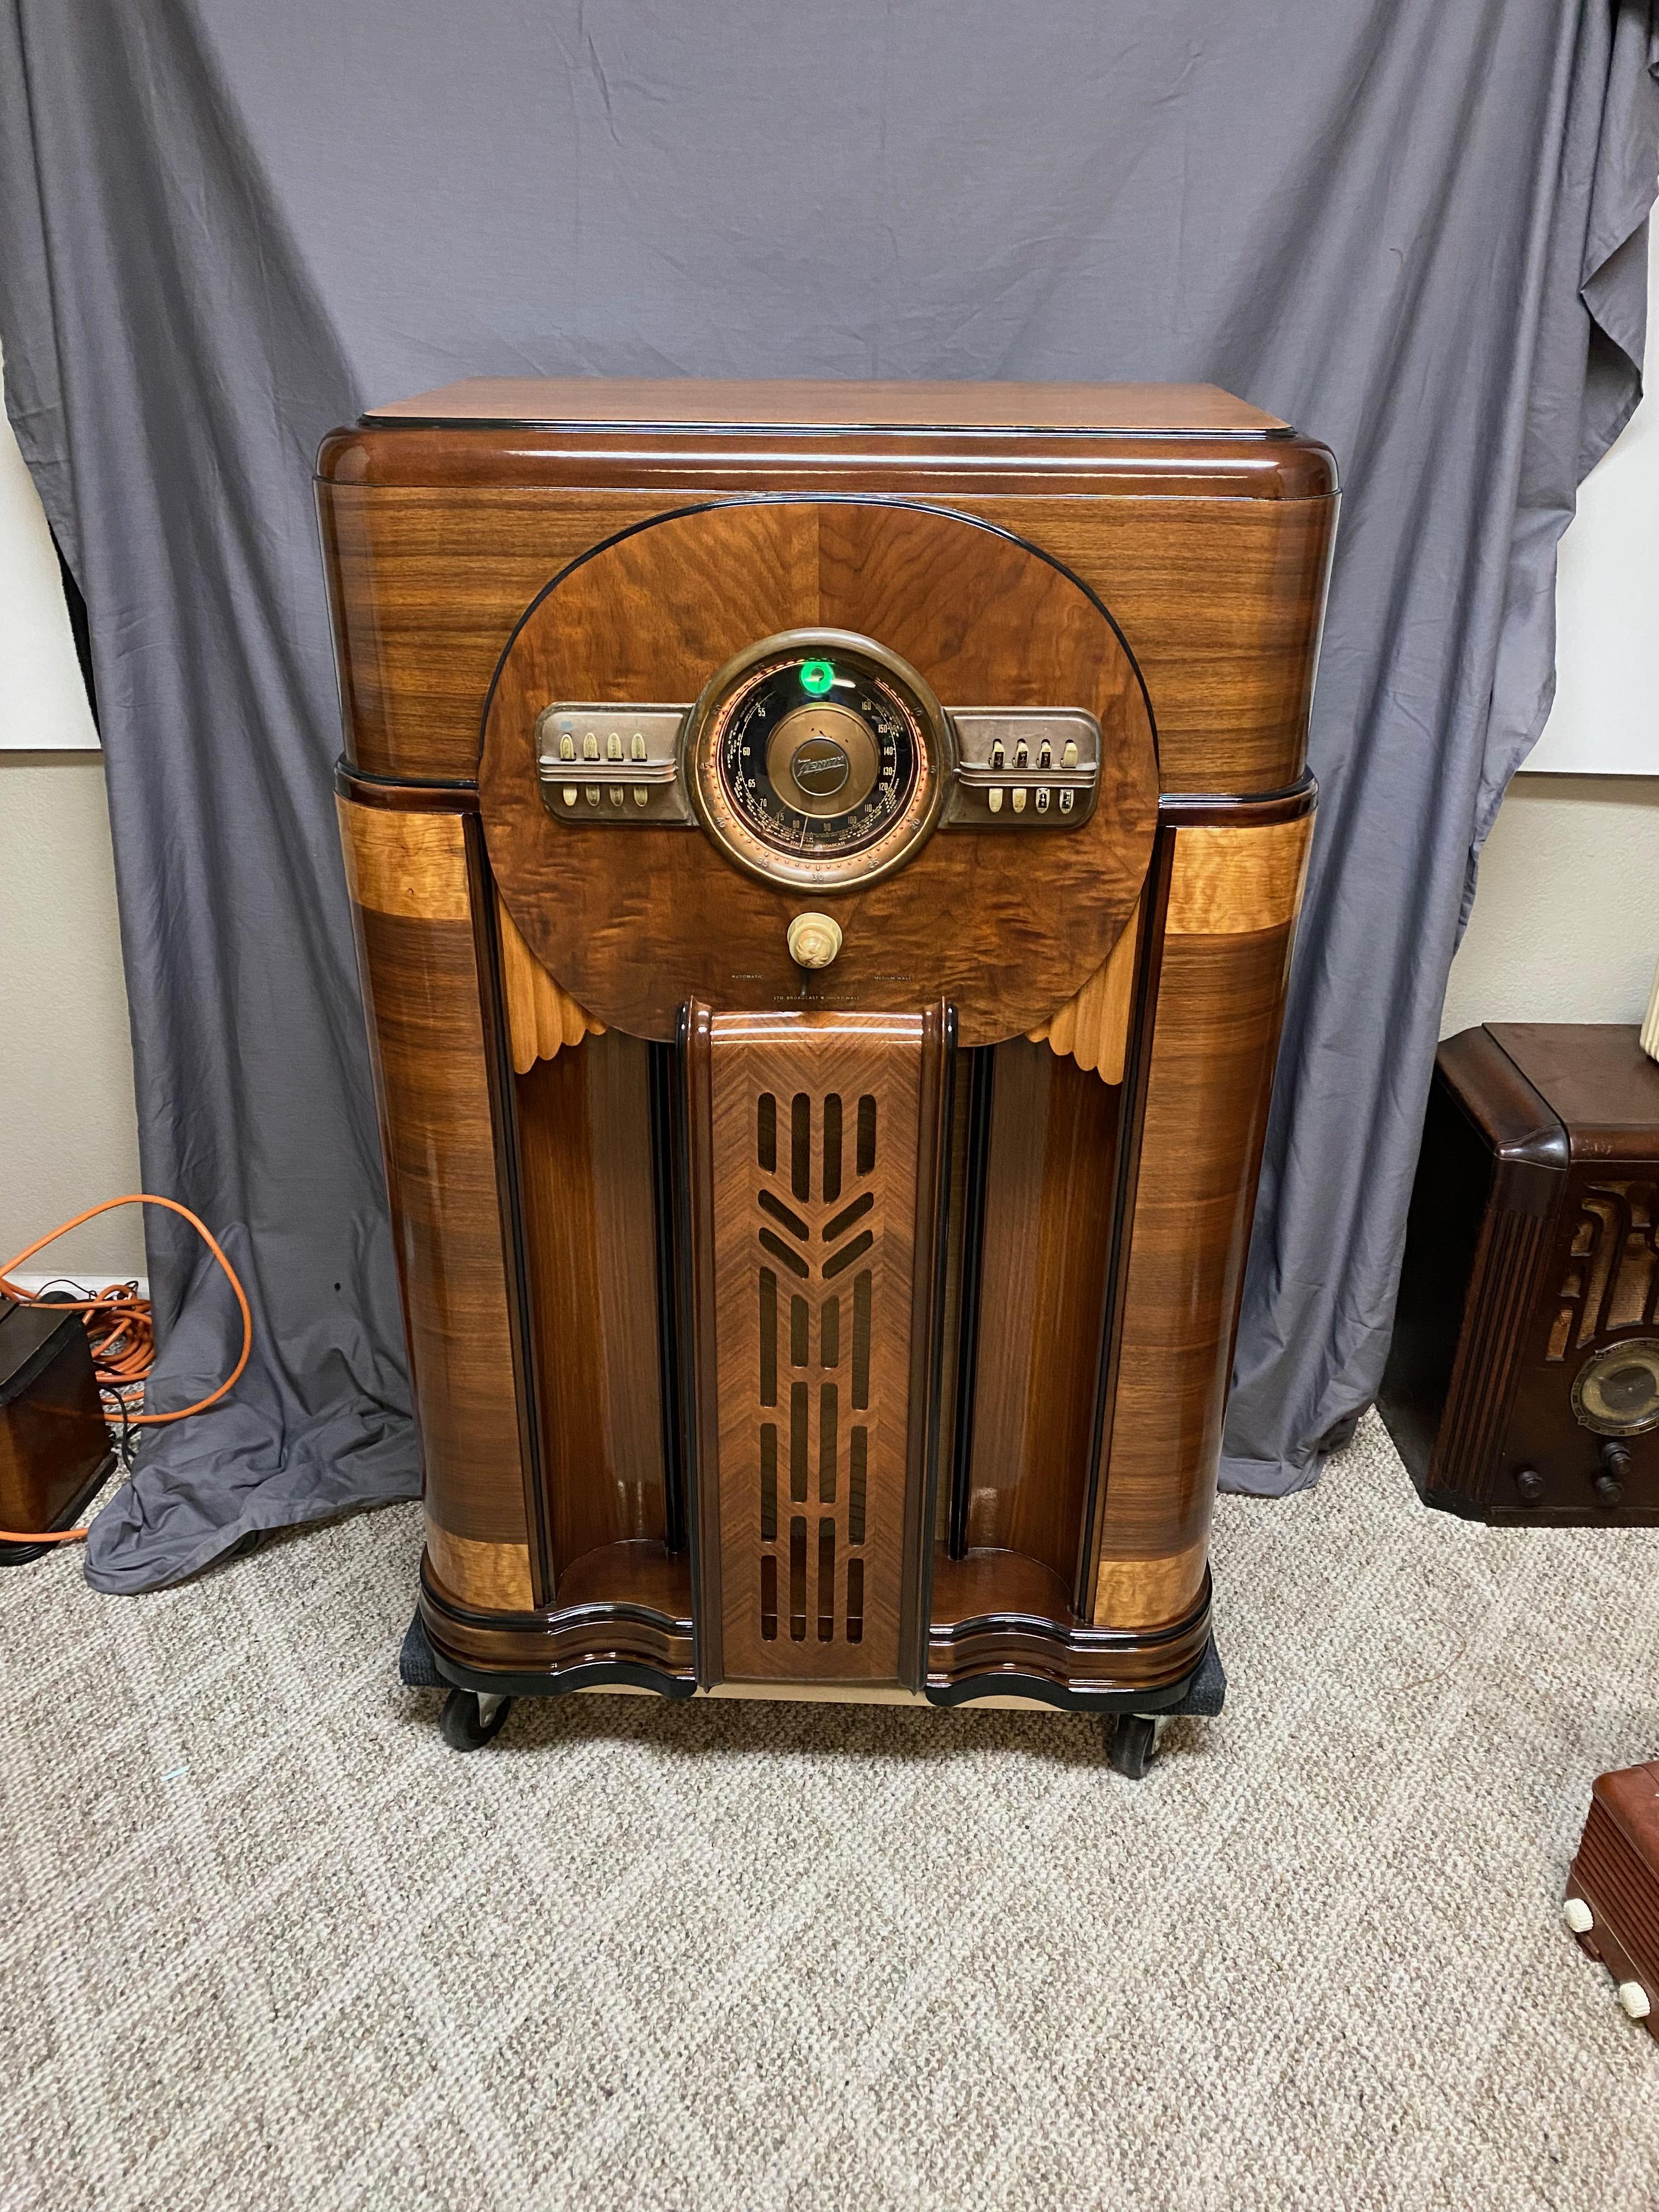 One of Zenith’s best-looking classic consoles made just before World War II in 1940. Last, of the Shutterdials, this twelve-tube radio has been completely refurbished and plays very well with strong selectivity. It has the Wavemagnet internal